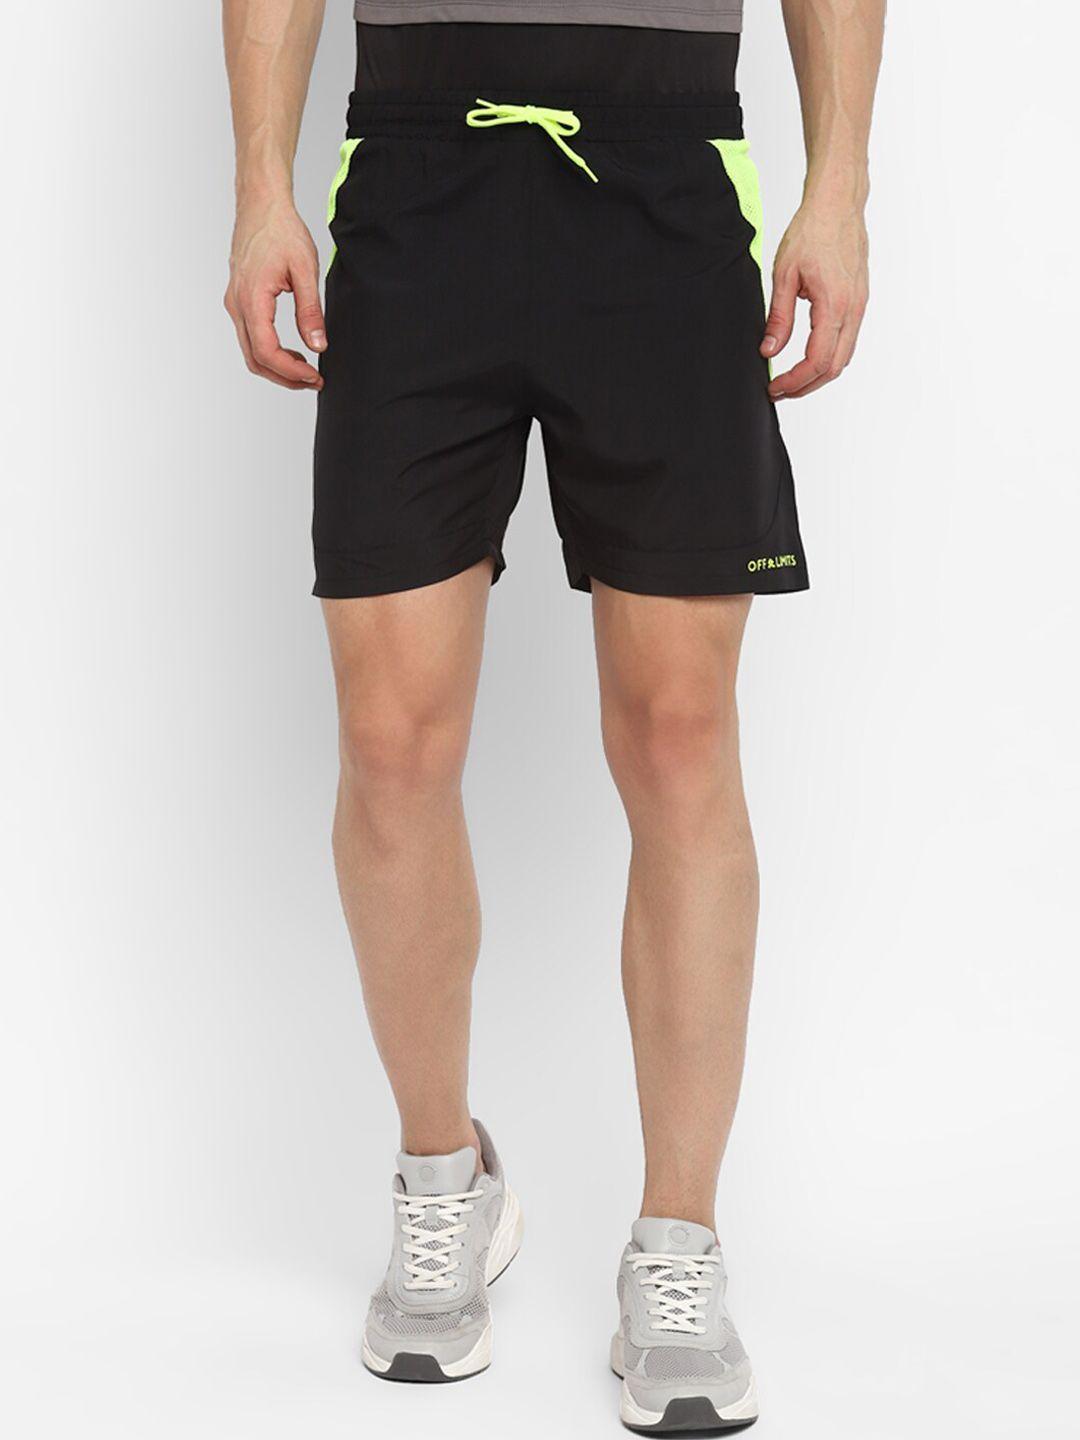 off limits men black slim fit sports shorts with antimicrobial technology